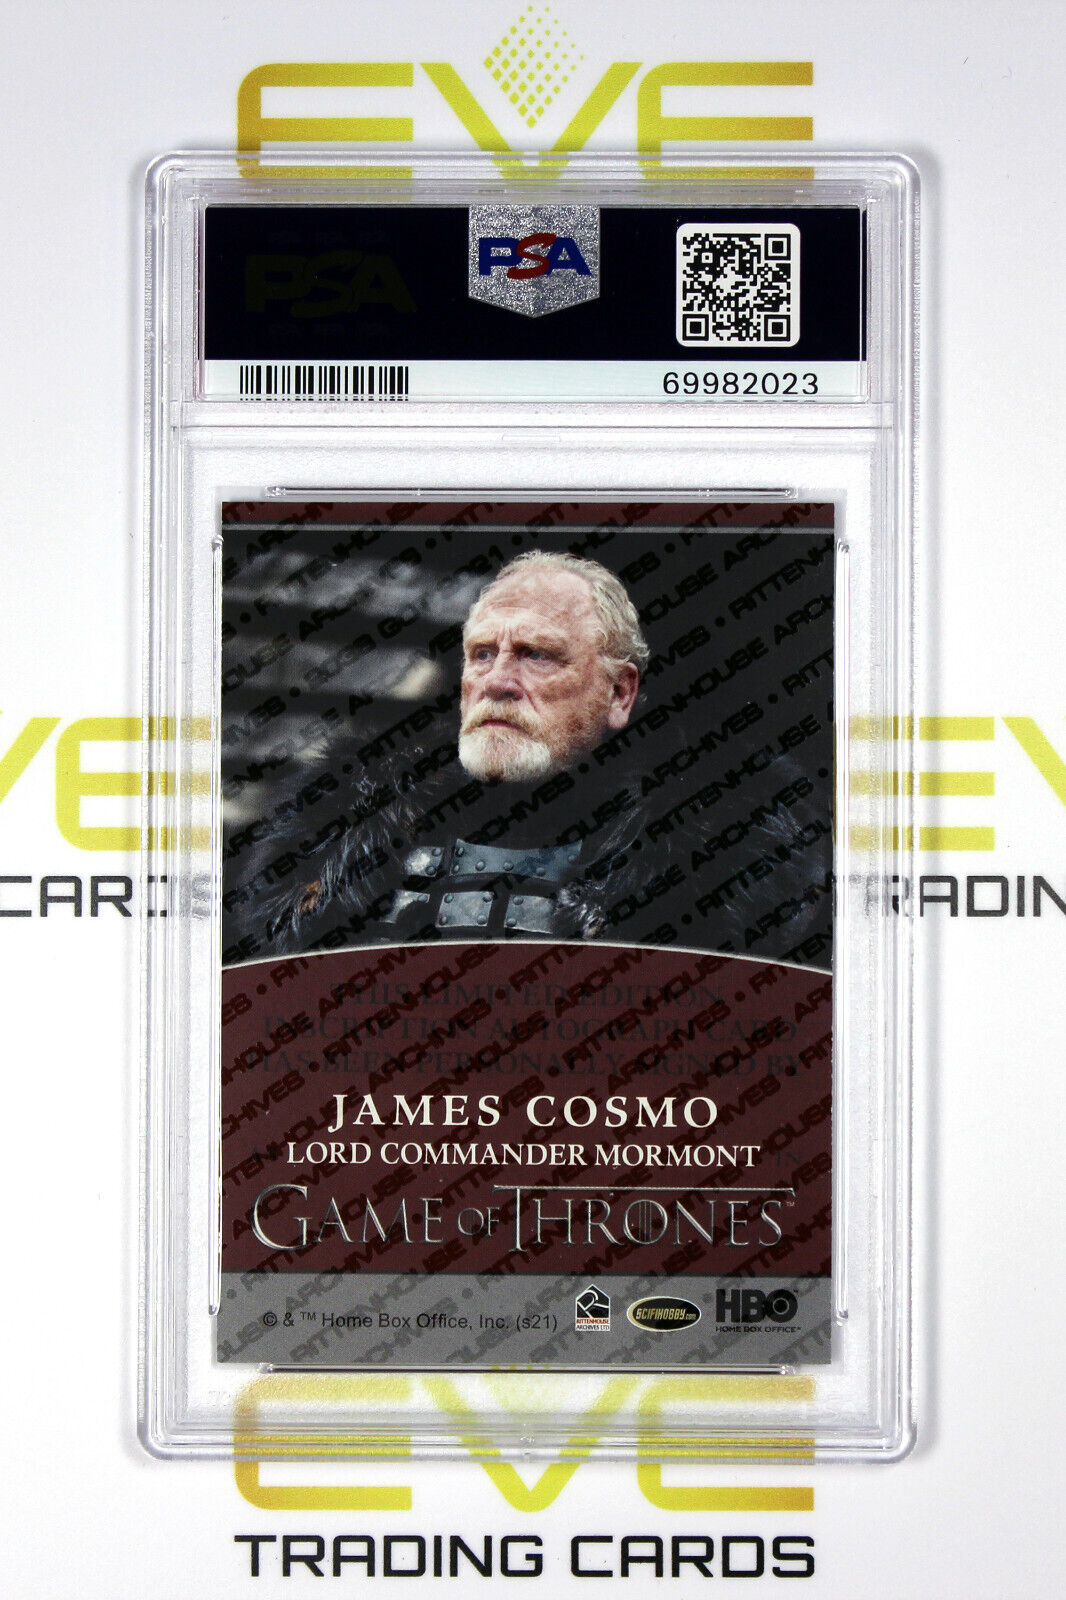 Graded Game of Thrones Auto Card - 2021 James Cosmo as Commander Mormont - PSA 9